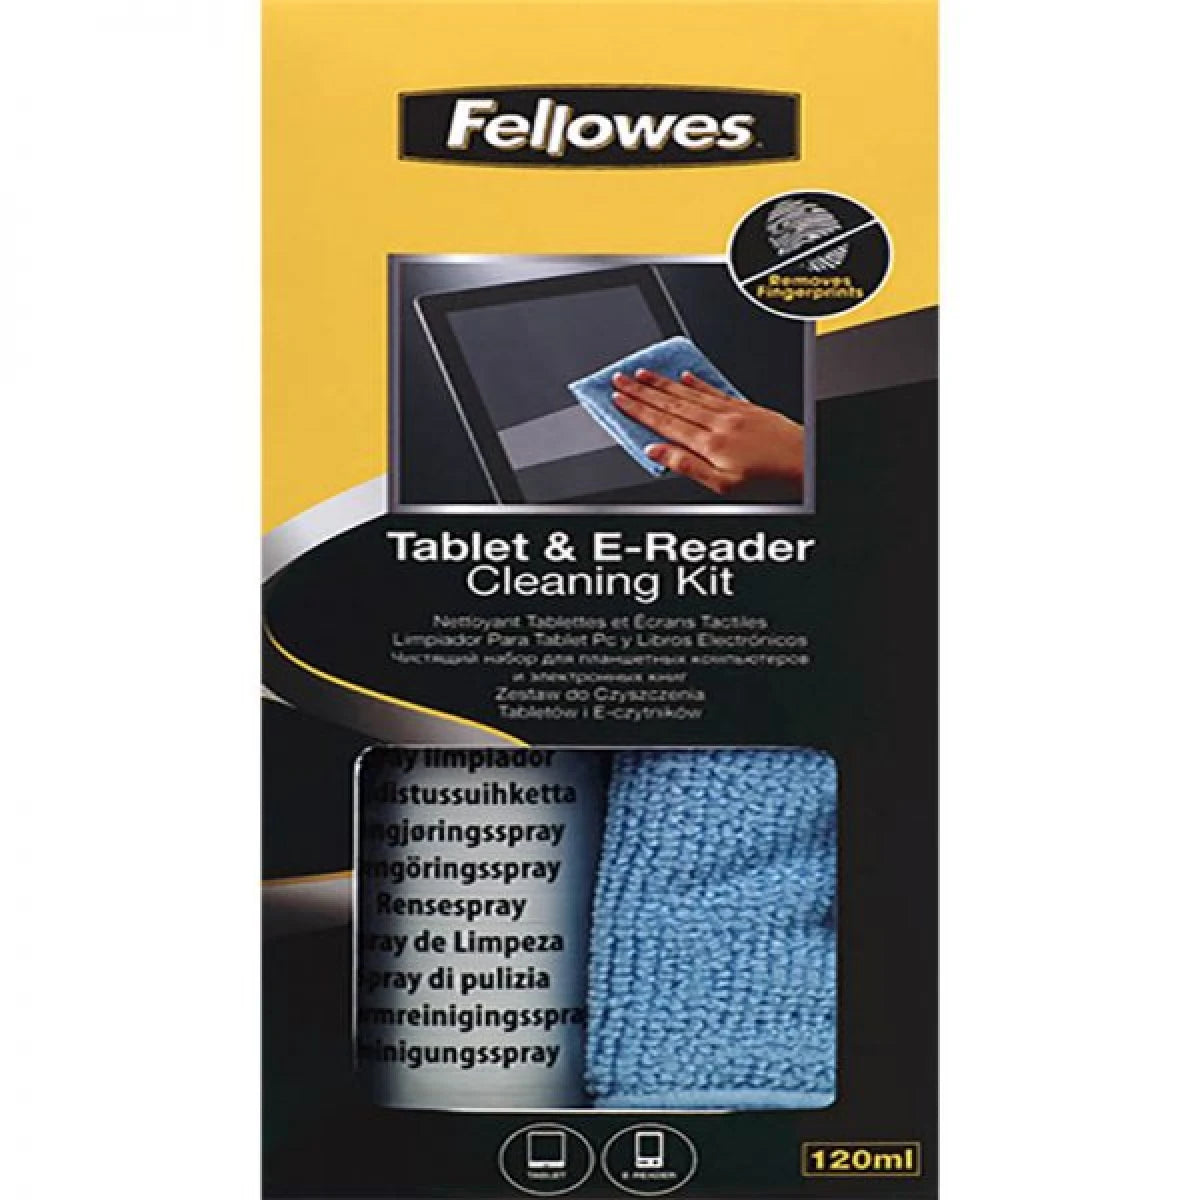 Fellowes Tablet Cleaner Kit for Home and Office Use